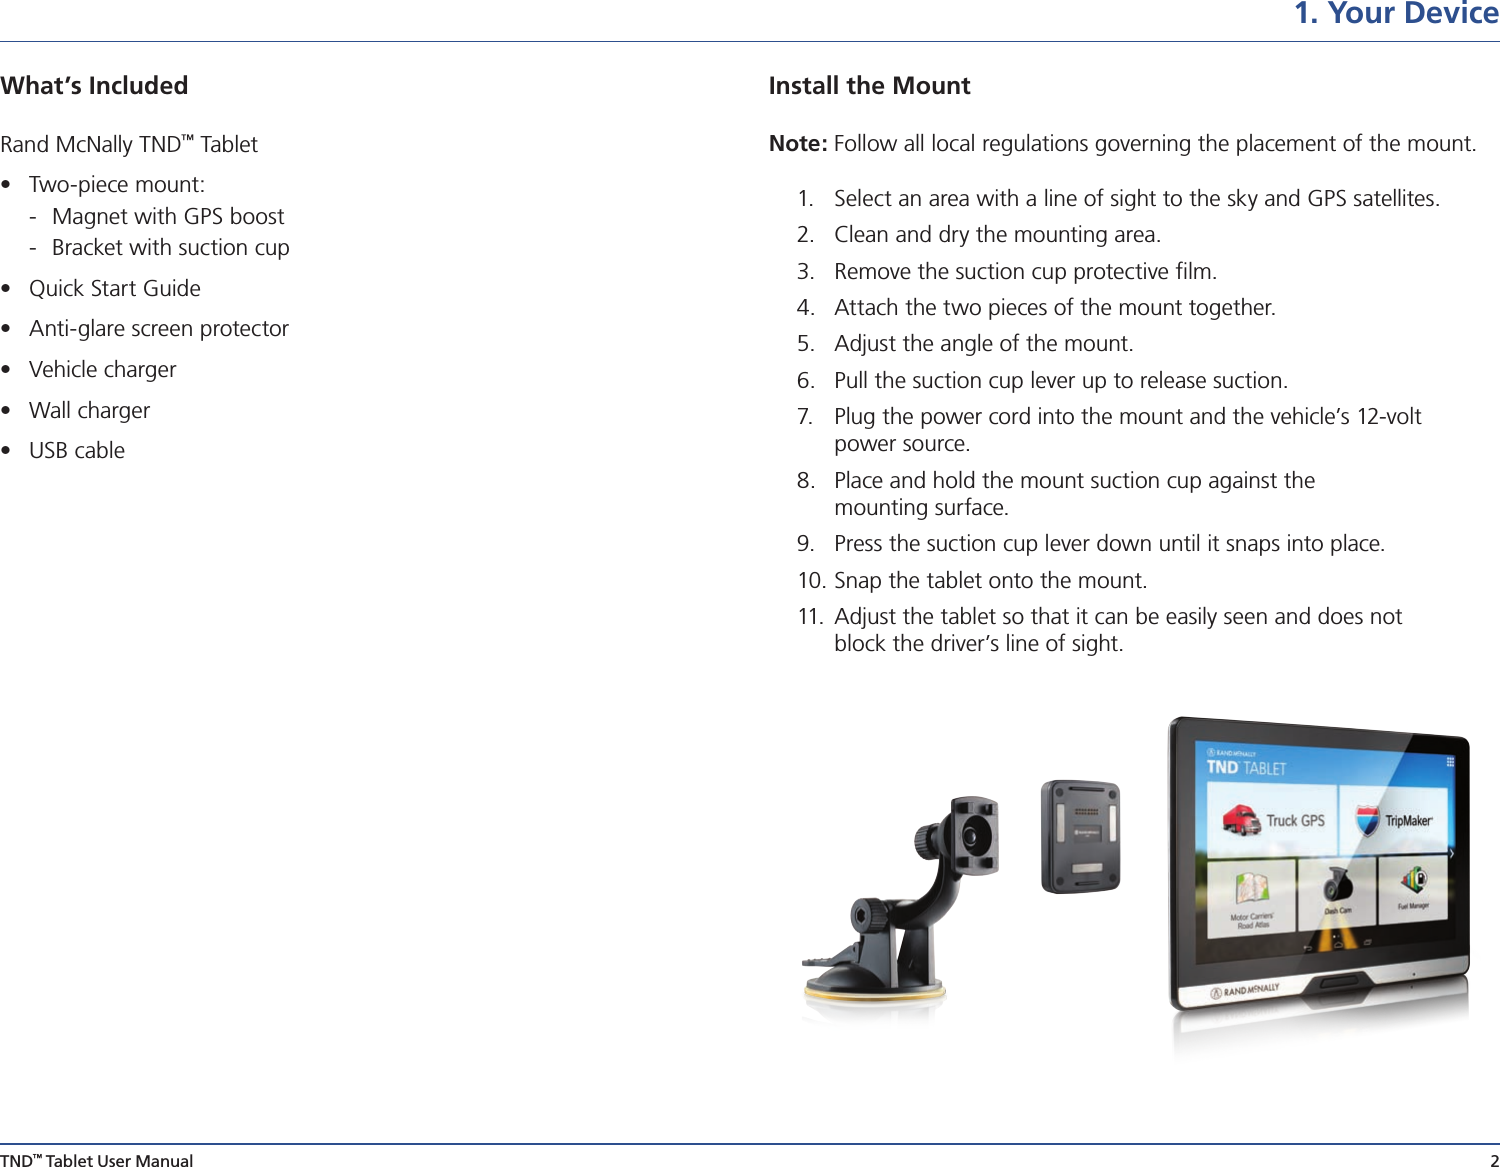 TND™ Tablet User Manual 2What’s Included  Rand McNally TND™ Tablet•  Two-piece mount:   -  Magnet with GPS boost   -  Bracket with suction cup•  Quick Start Guide•  Anti-glare screen protector•  Vehicle charger•  Wall charger•  USB cable1. Your DeviceInstall the Mount Note: Follow all local regulations governing the placement of the mount. 1.  Select an area with a line of sight to the sky and GPS satellites.2.  Clean and dry the mounting area.3.  Remove the suction cup protective ﬁlm.4.  Attach the two pieces of the mount together.5.  Adjust the angle of the mount.6.  Pull the suction cup lever up to release suction.7.  Plug the power cord into the mount and the vehicle’s 12-volt  power source.8.  Place and hold the mount suction cup against the  mounting surface.9.  Press the suction cup lever down until it snaps into place.10. Snap the tablet onto the mount.11.   Adjust the tablet so that it can be easily seen and does not  block the driver’s line of sight.